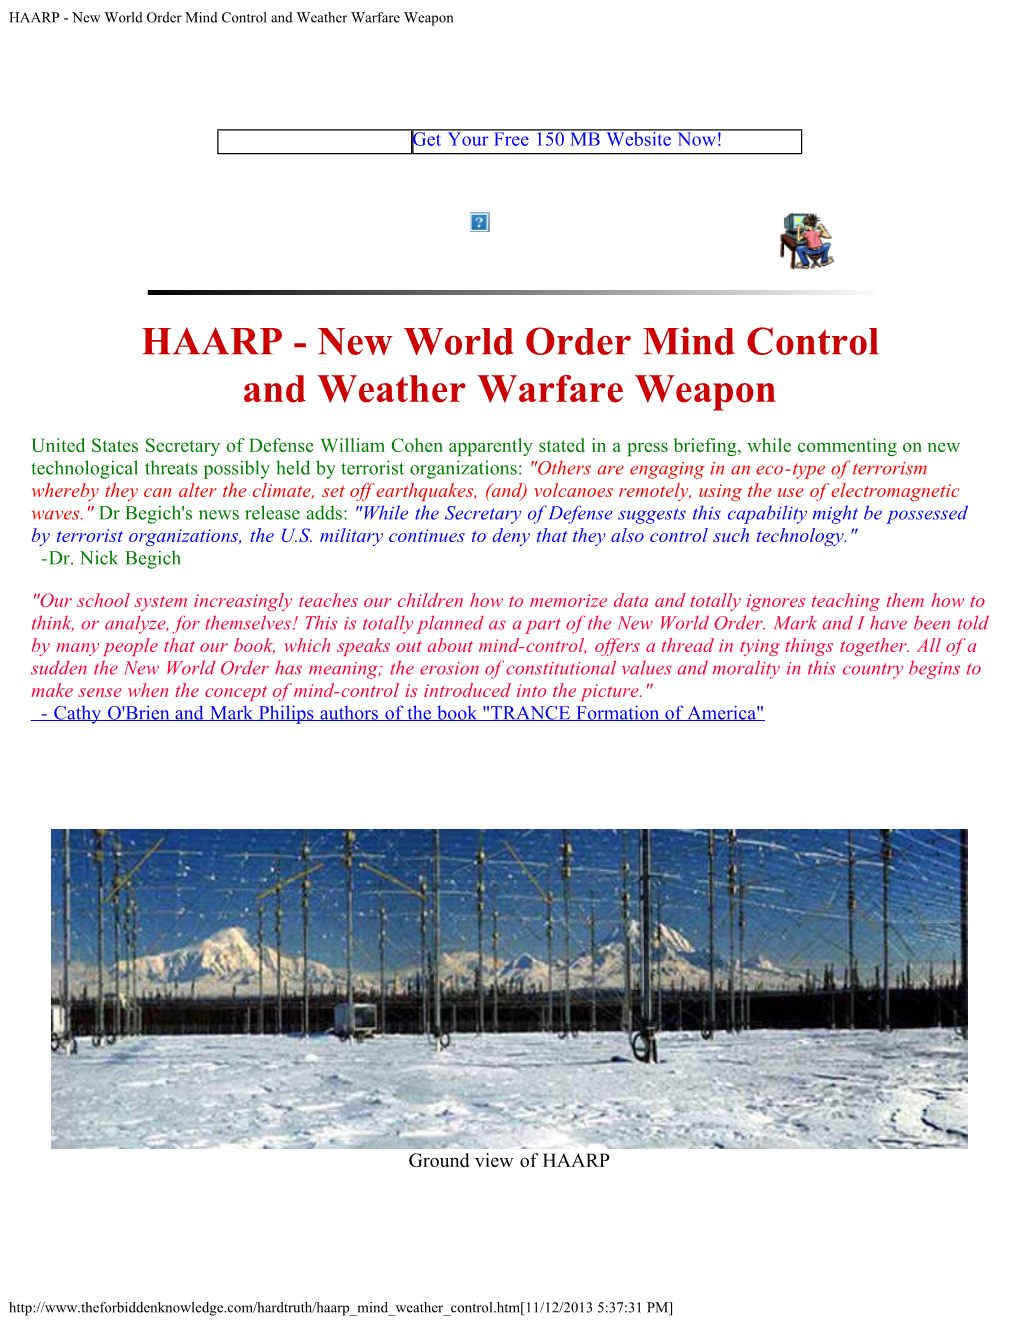 HAARP - New World Order Mind Control and Weather Warfare Weapon